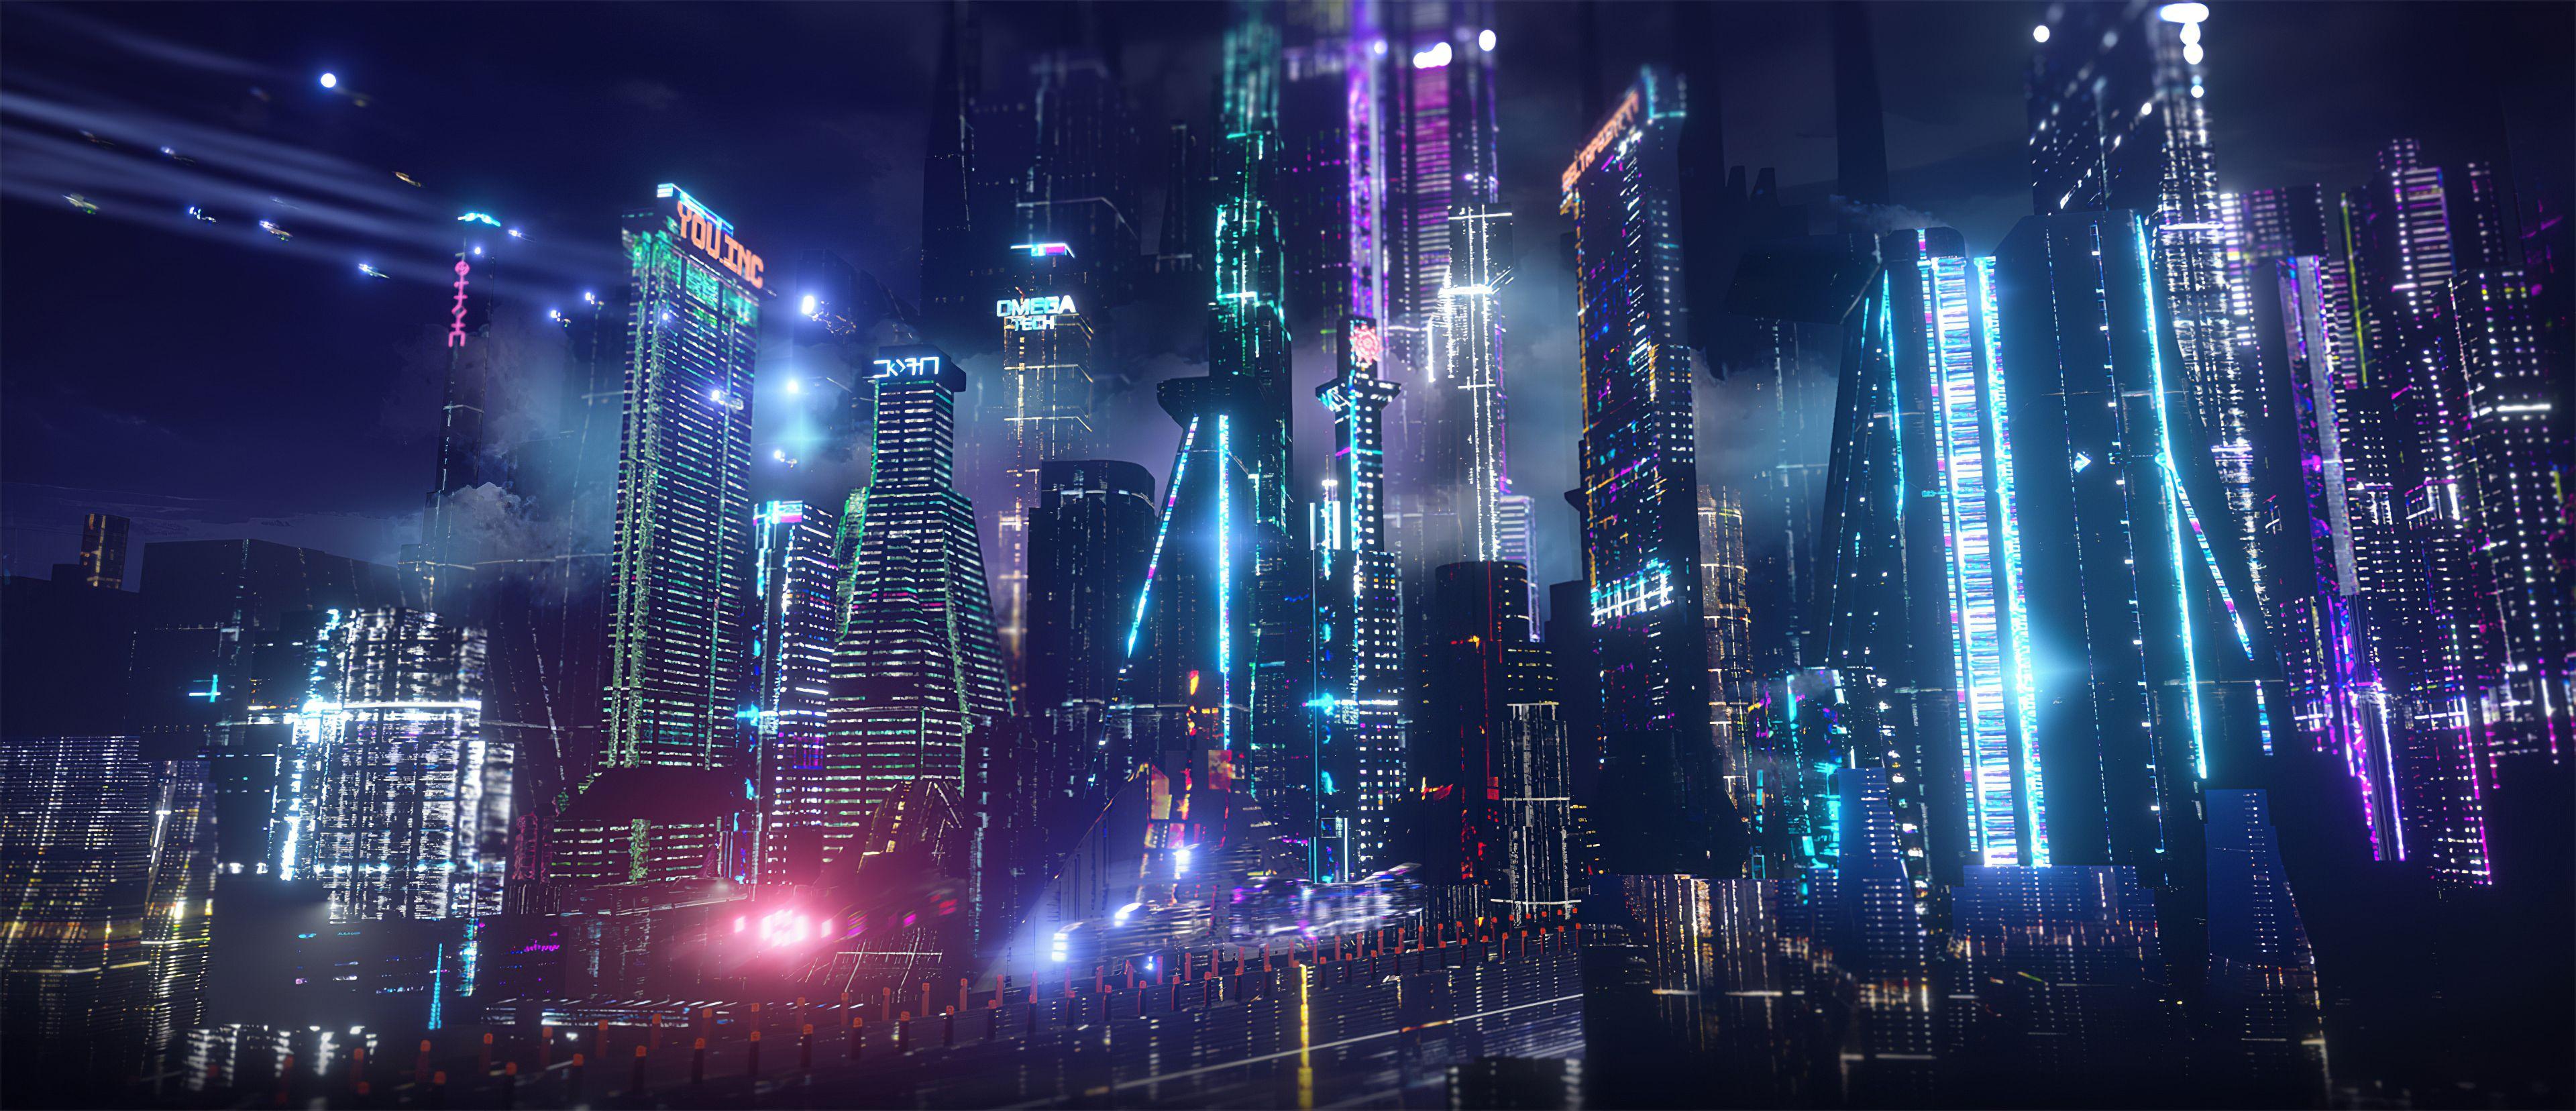 Live wallpaper Girl on the background of a neon city DOWNLOAD